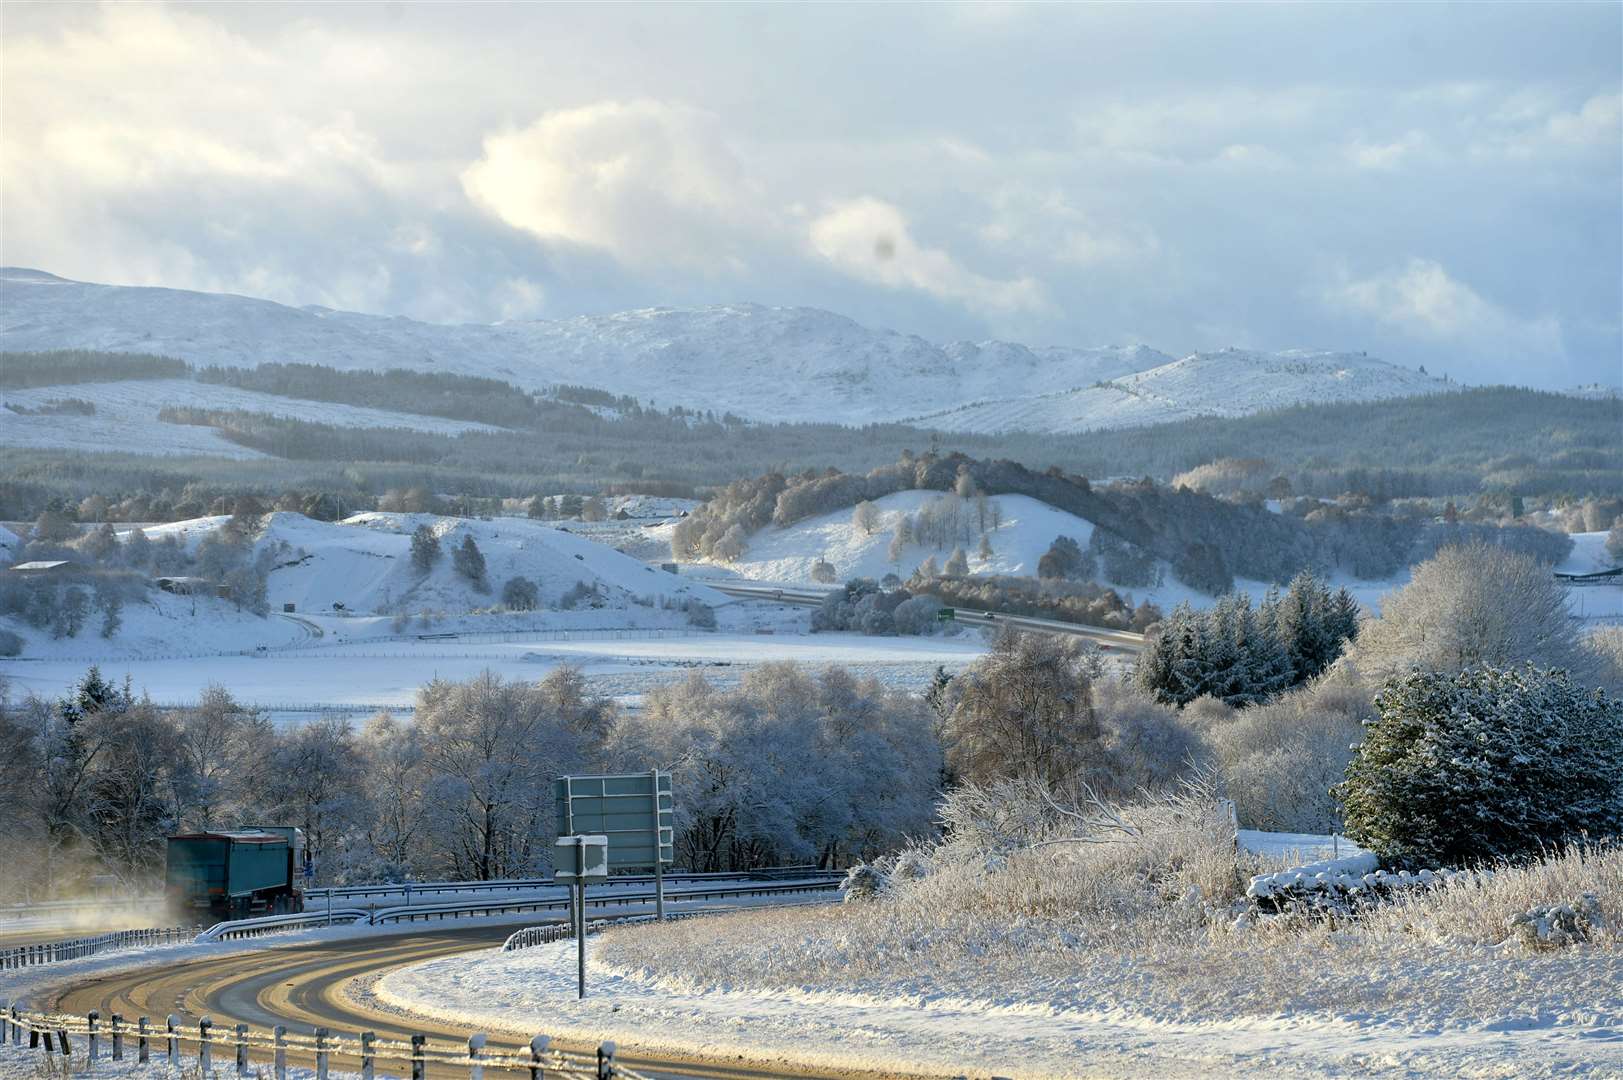 A winter wonderland south of Inverness.